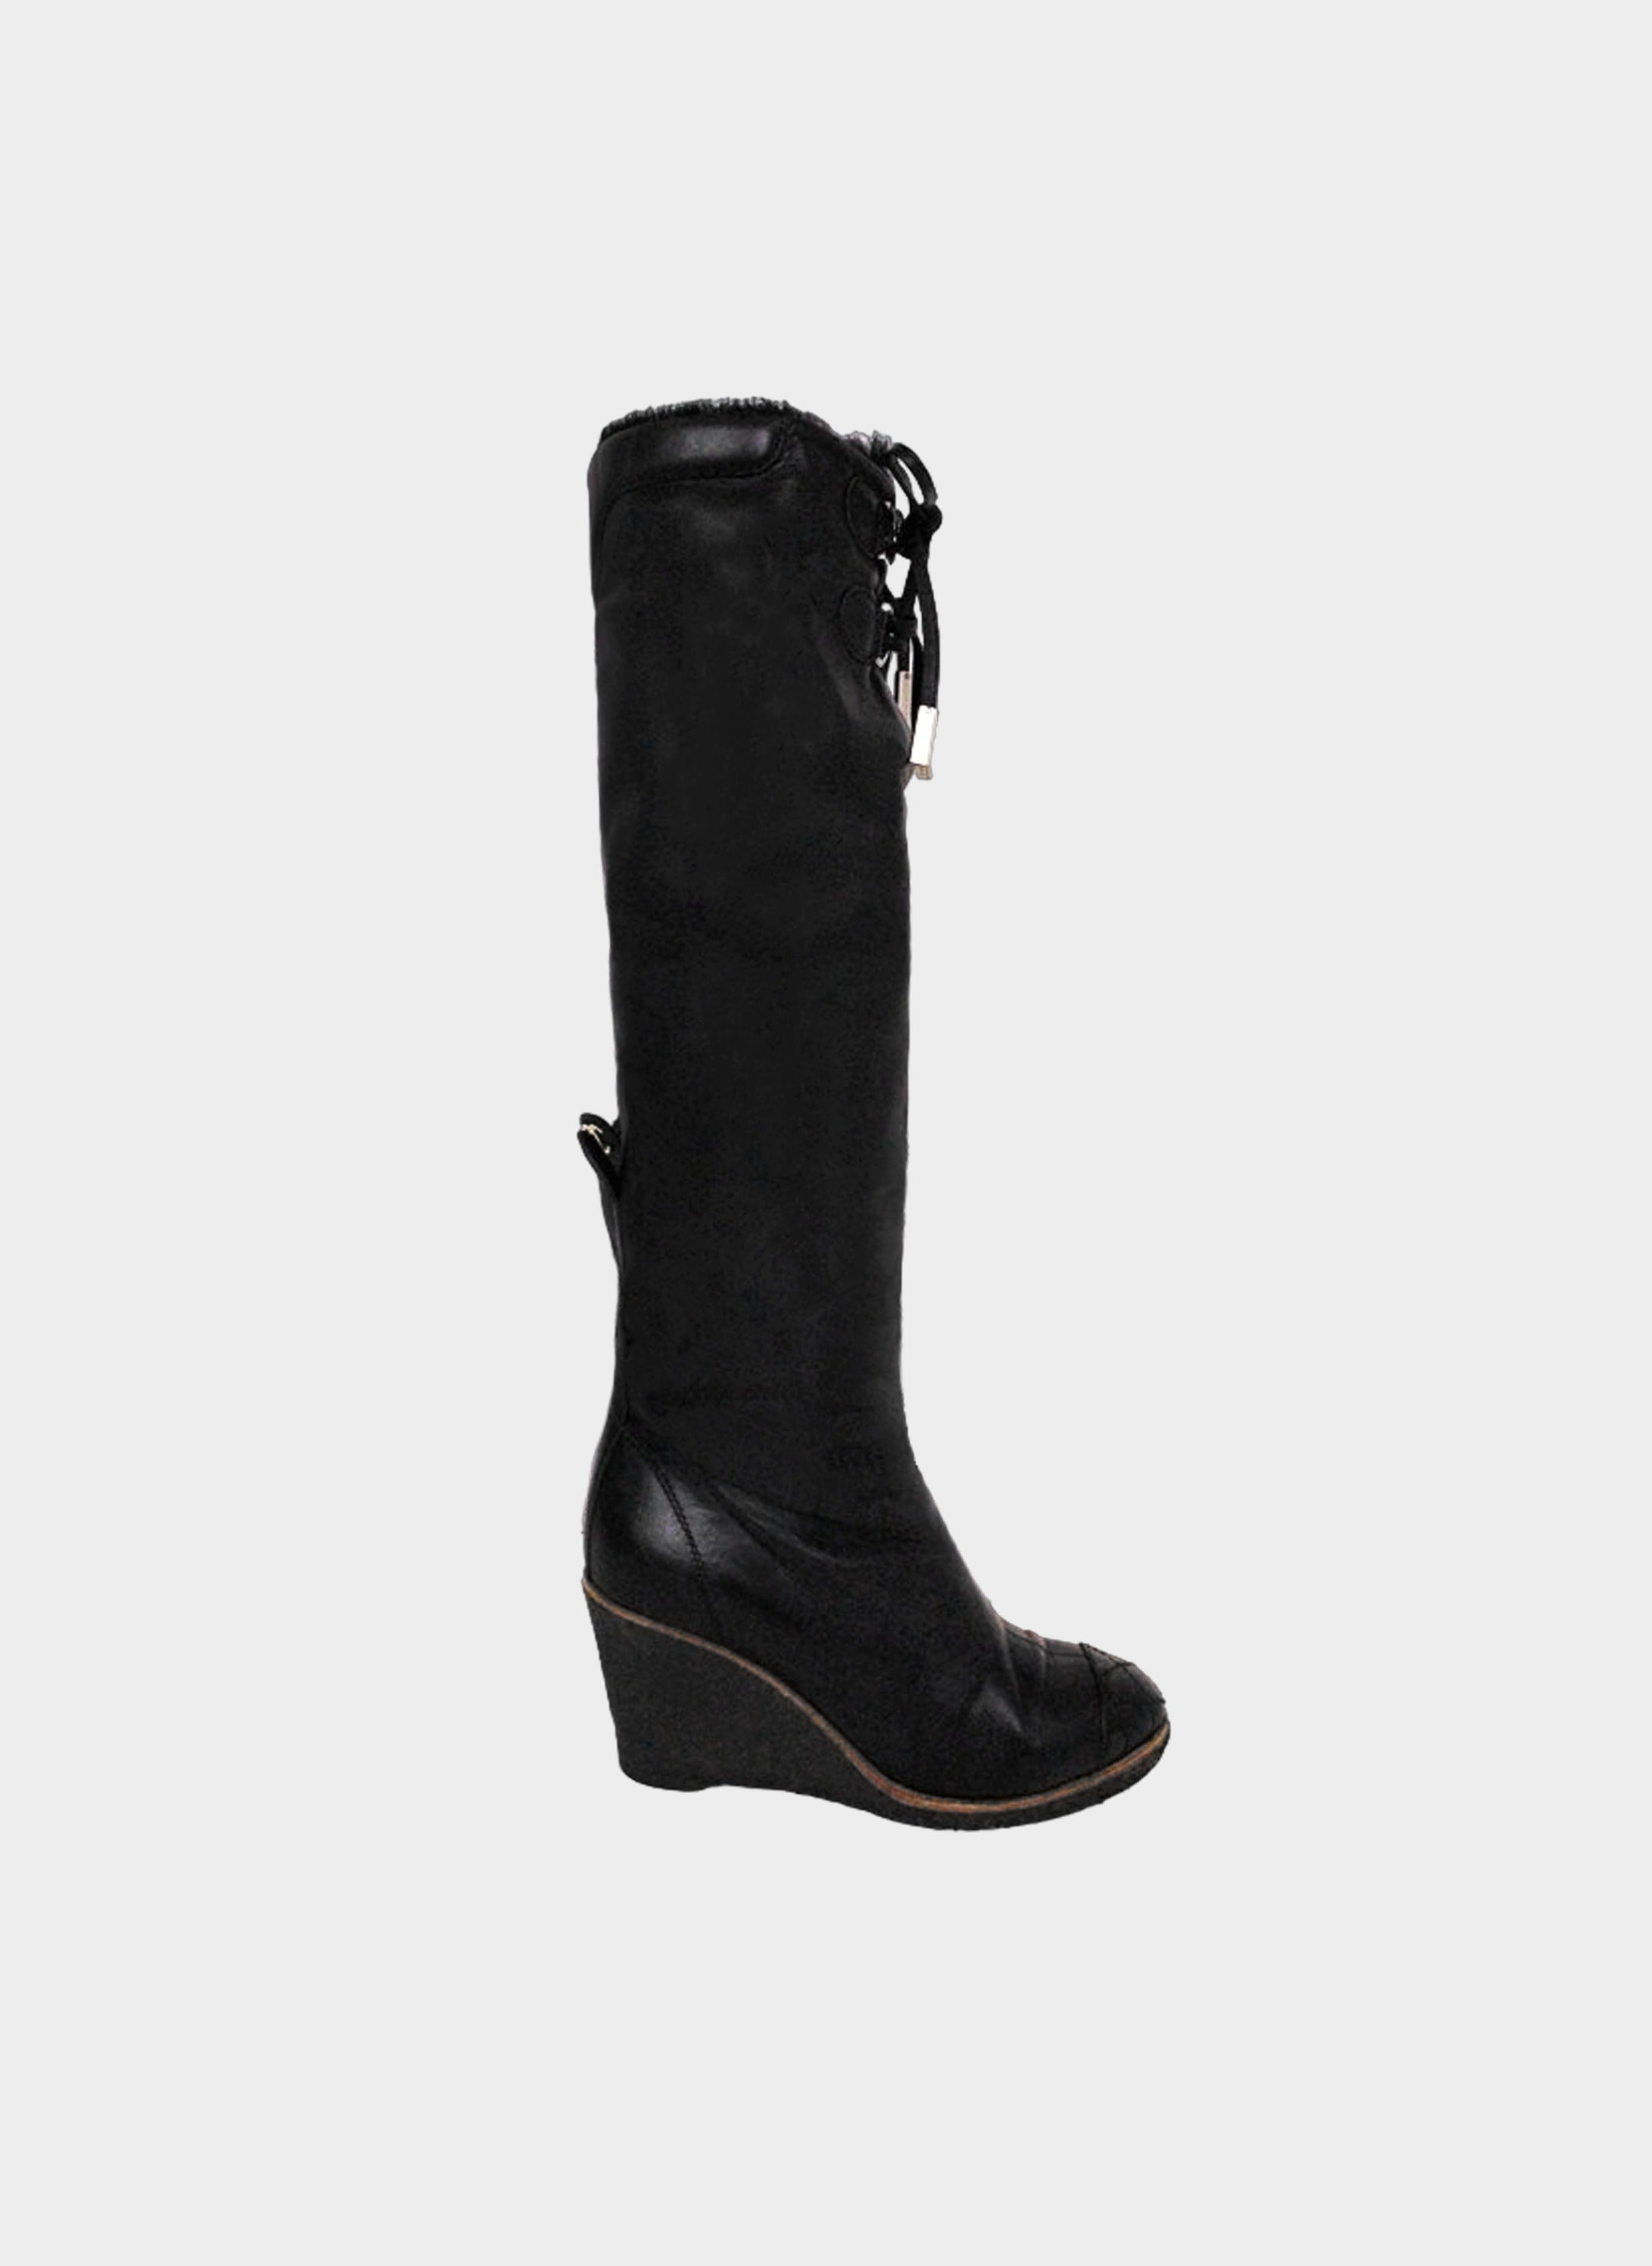 Chanel 2010s Black Leather Fold-over Wedged Long Boots · INTO